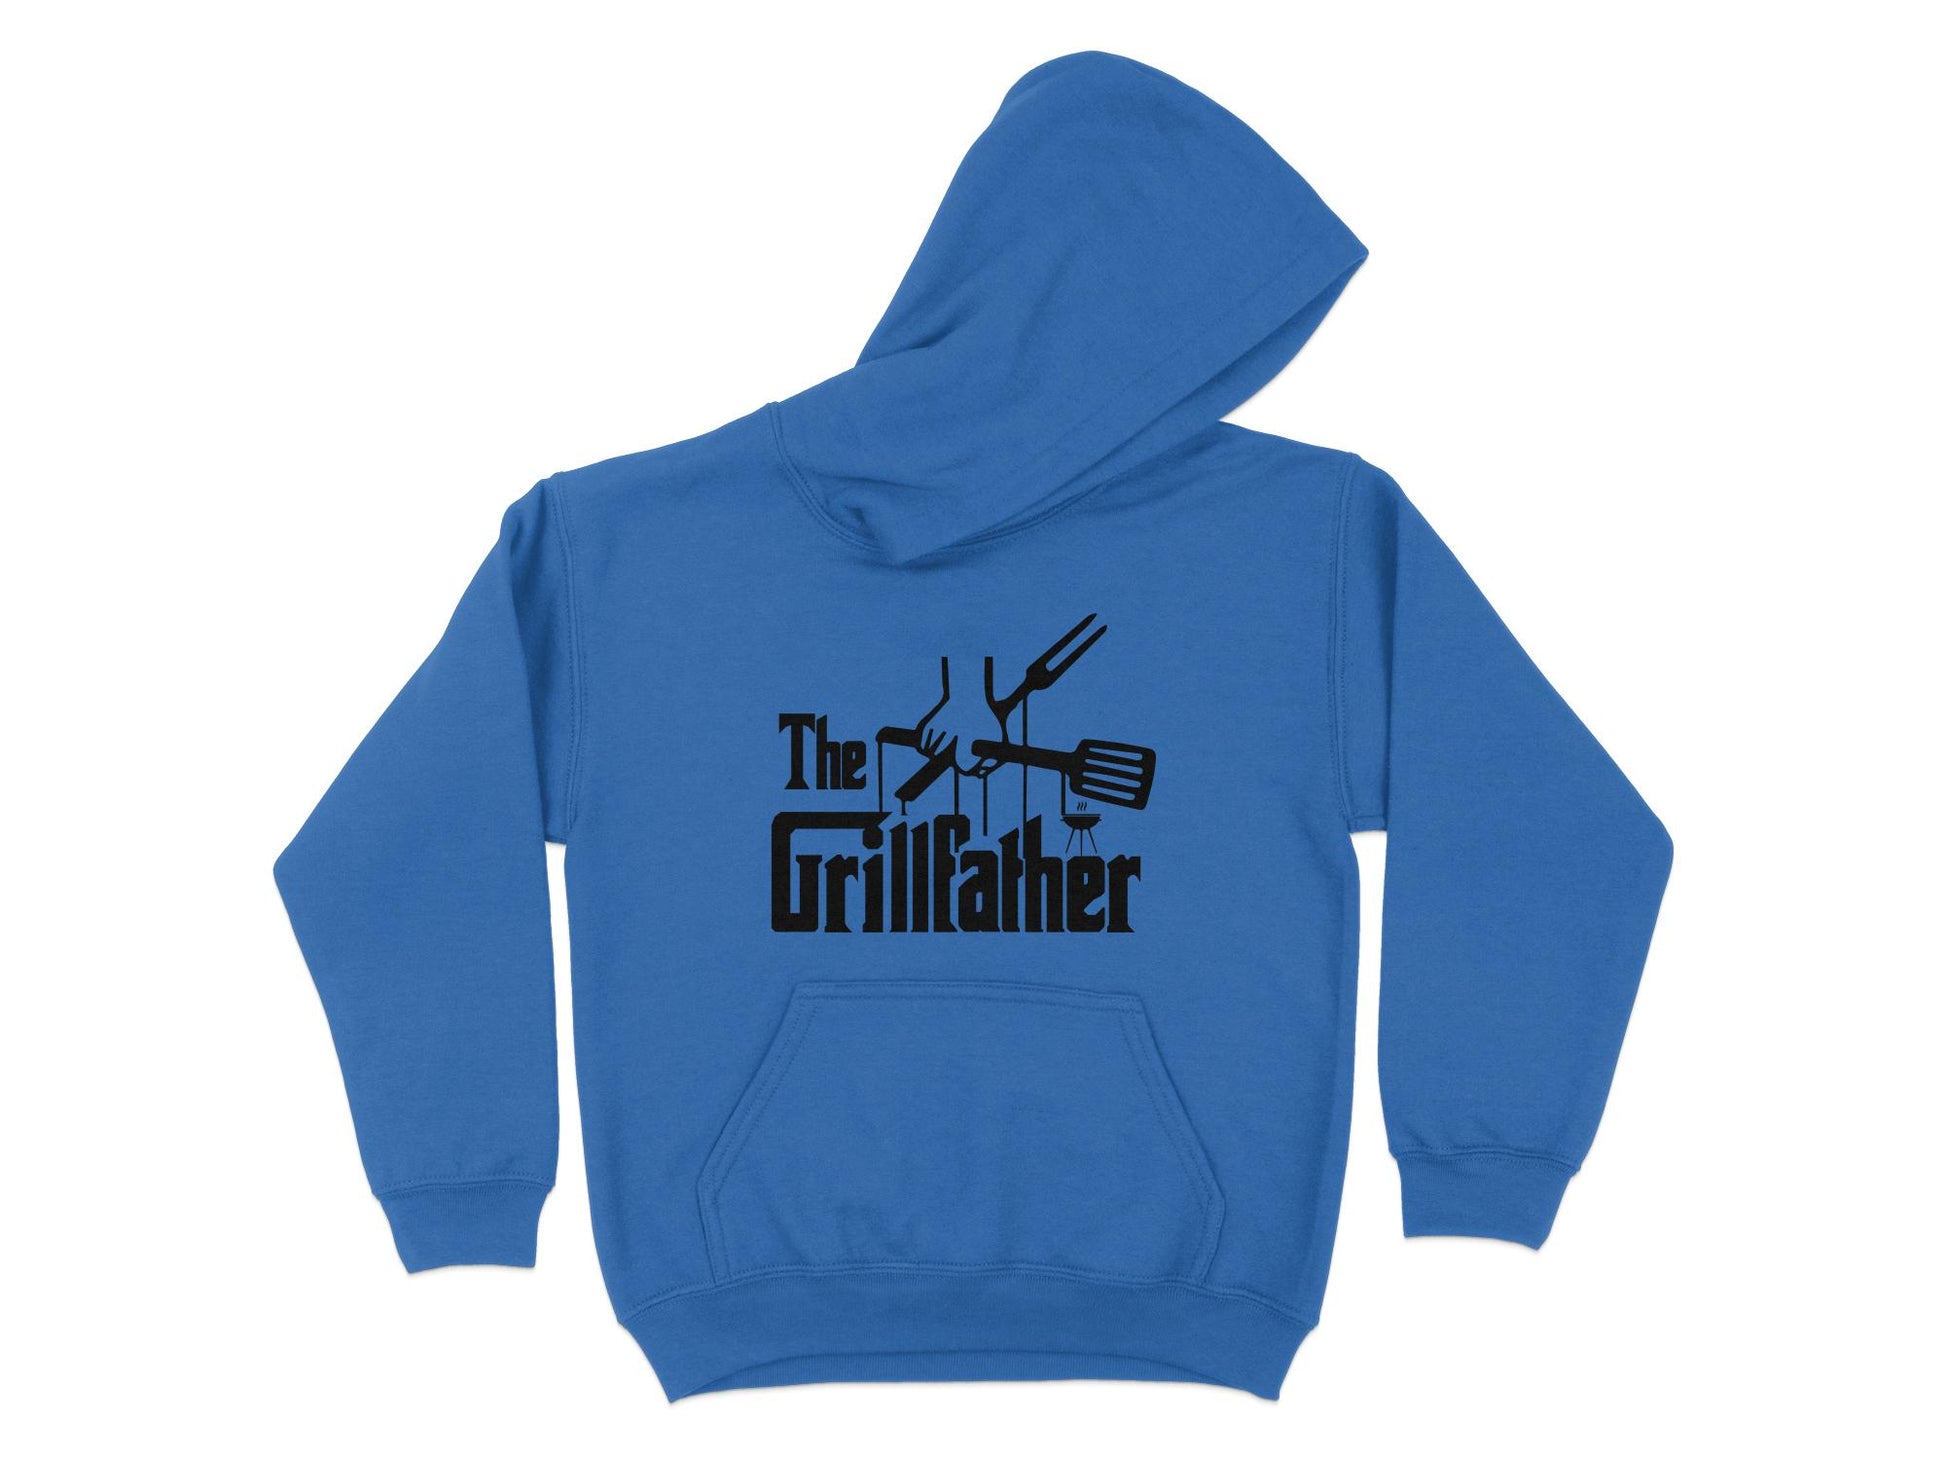 Grillfather Hoodie, royal blue